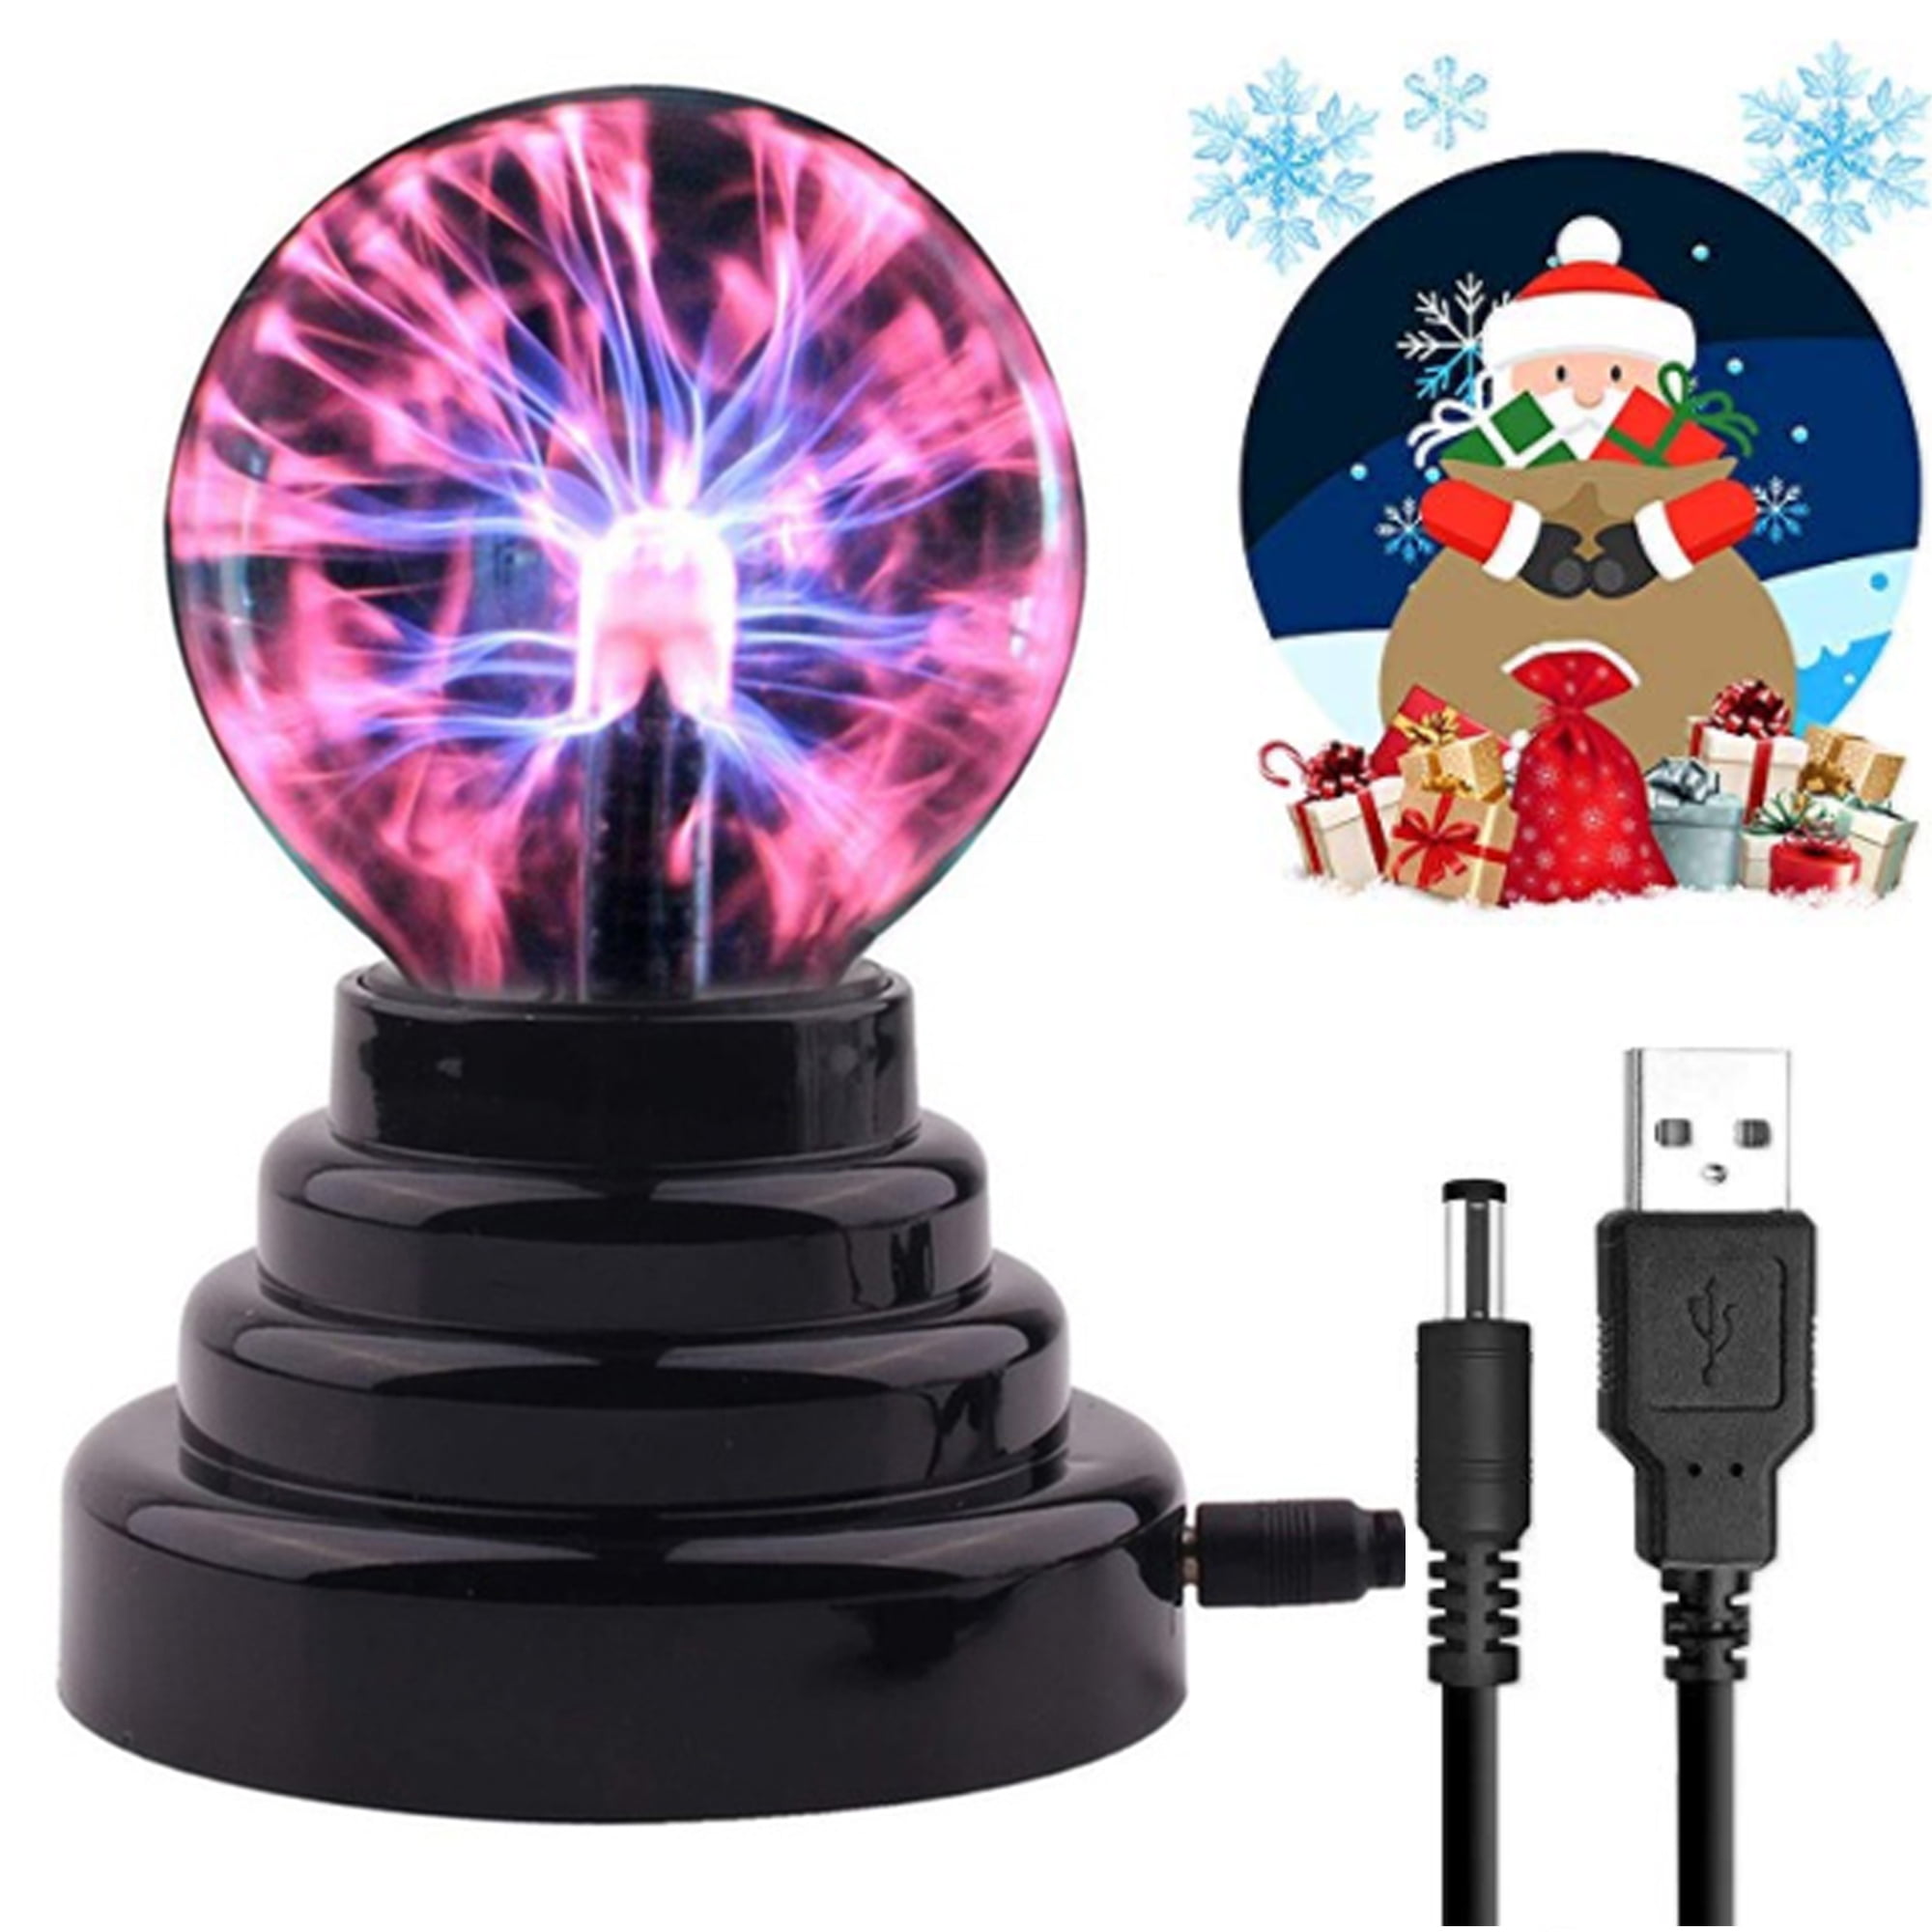 Plasma Magic Lighting Static Ball Electric Crystal Globe Sphere USB Operated Christmas Gift Party Lamp 